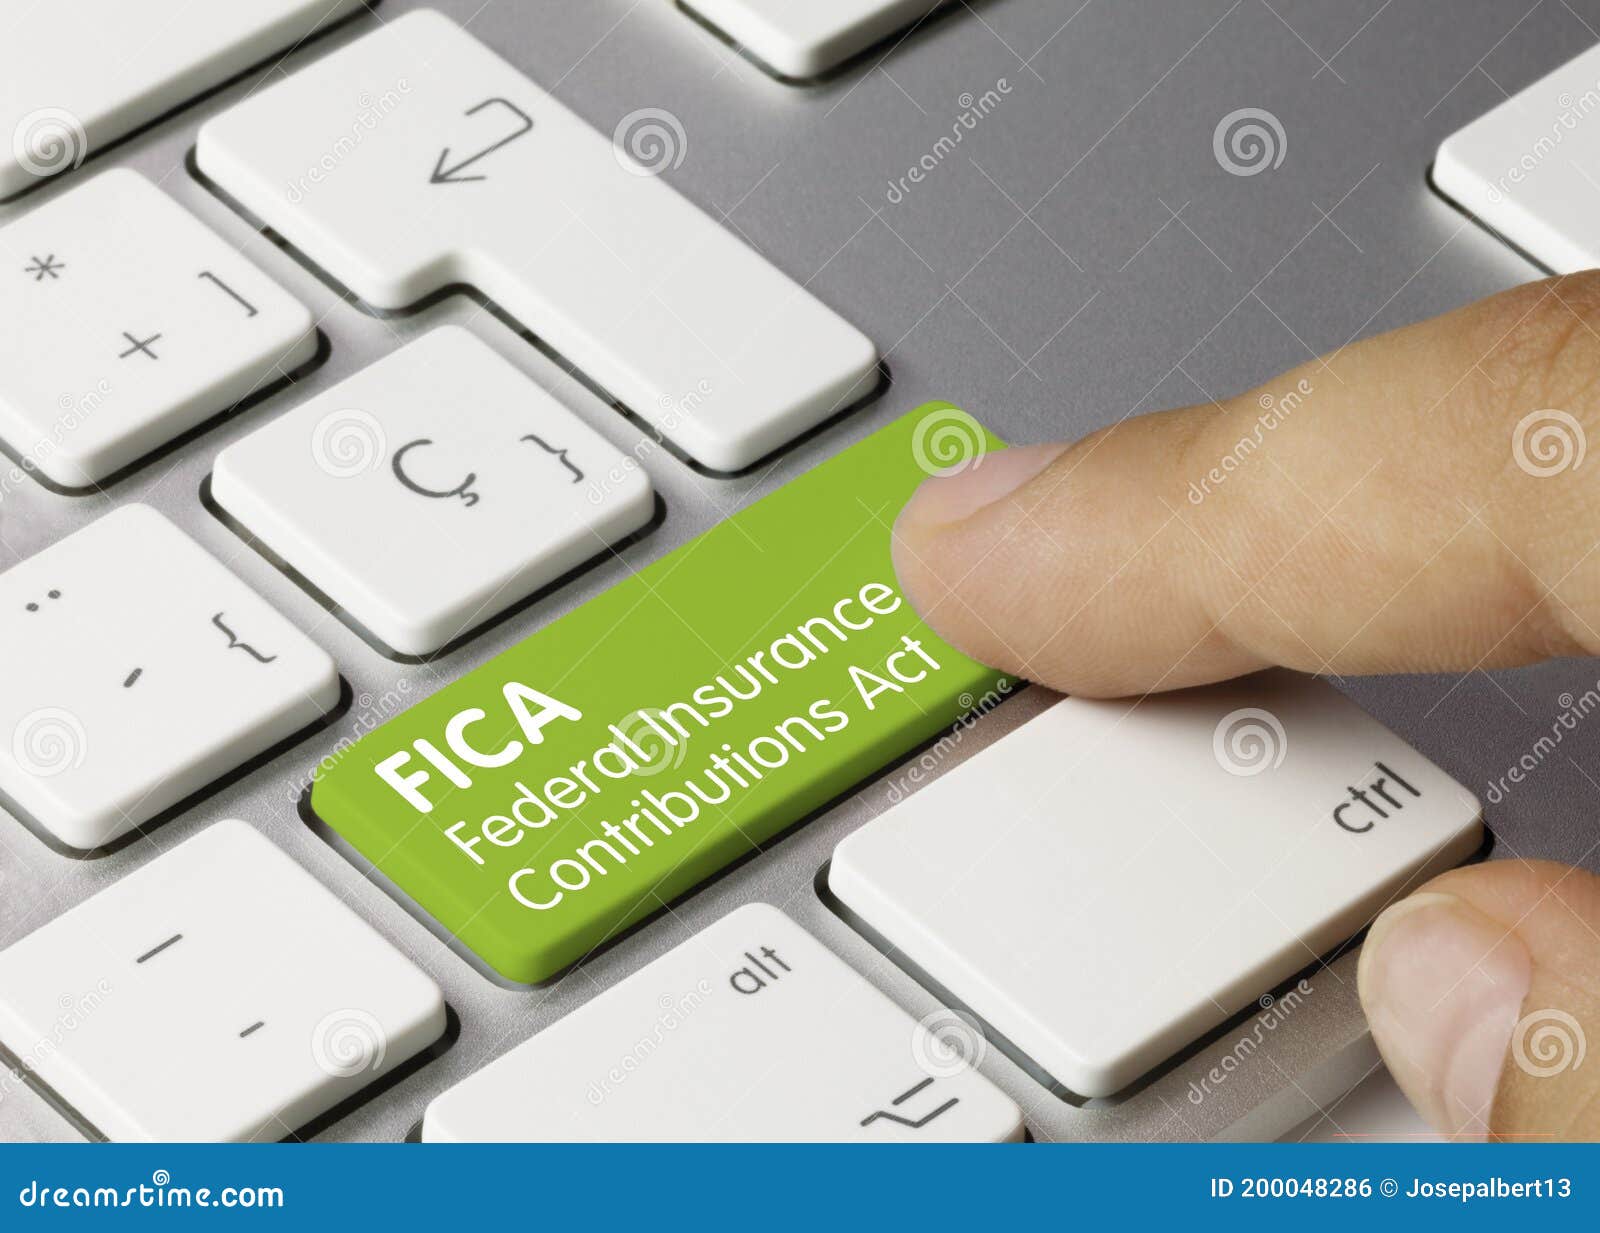 fica federal insurance contributions act - inscription on green keyboard key